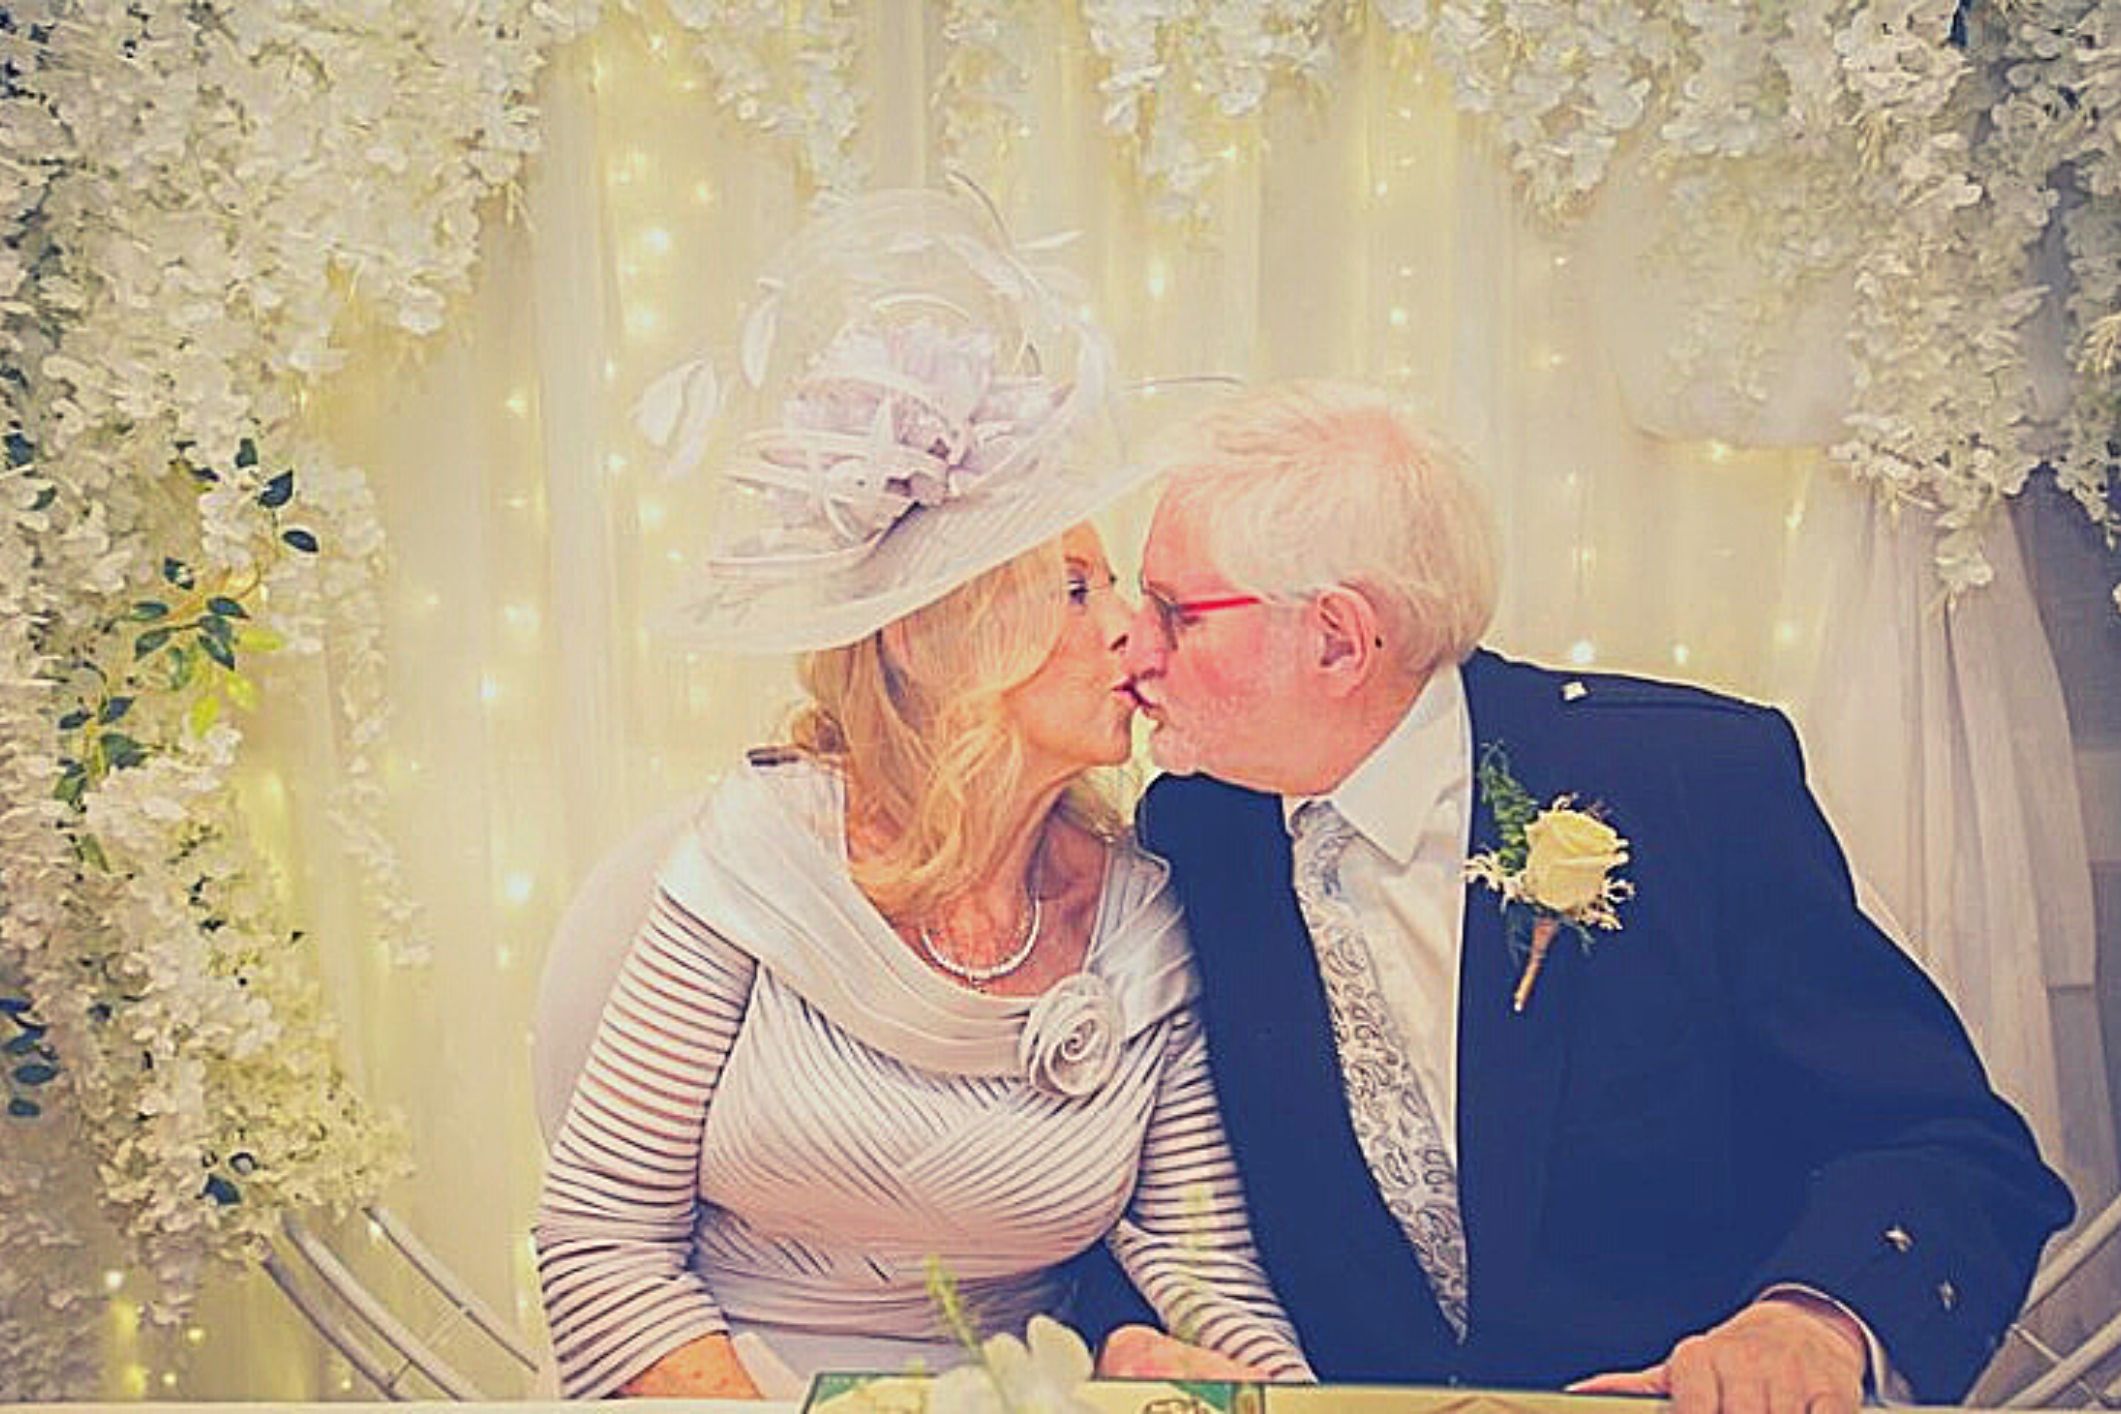 Couple in their 80s get married after falling in love on internet dating site